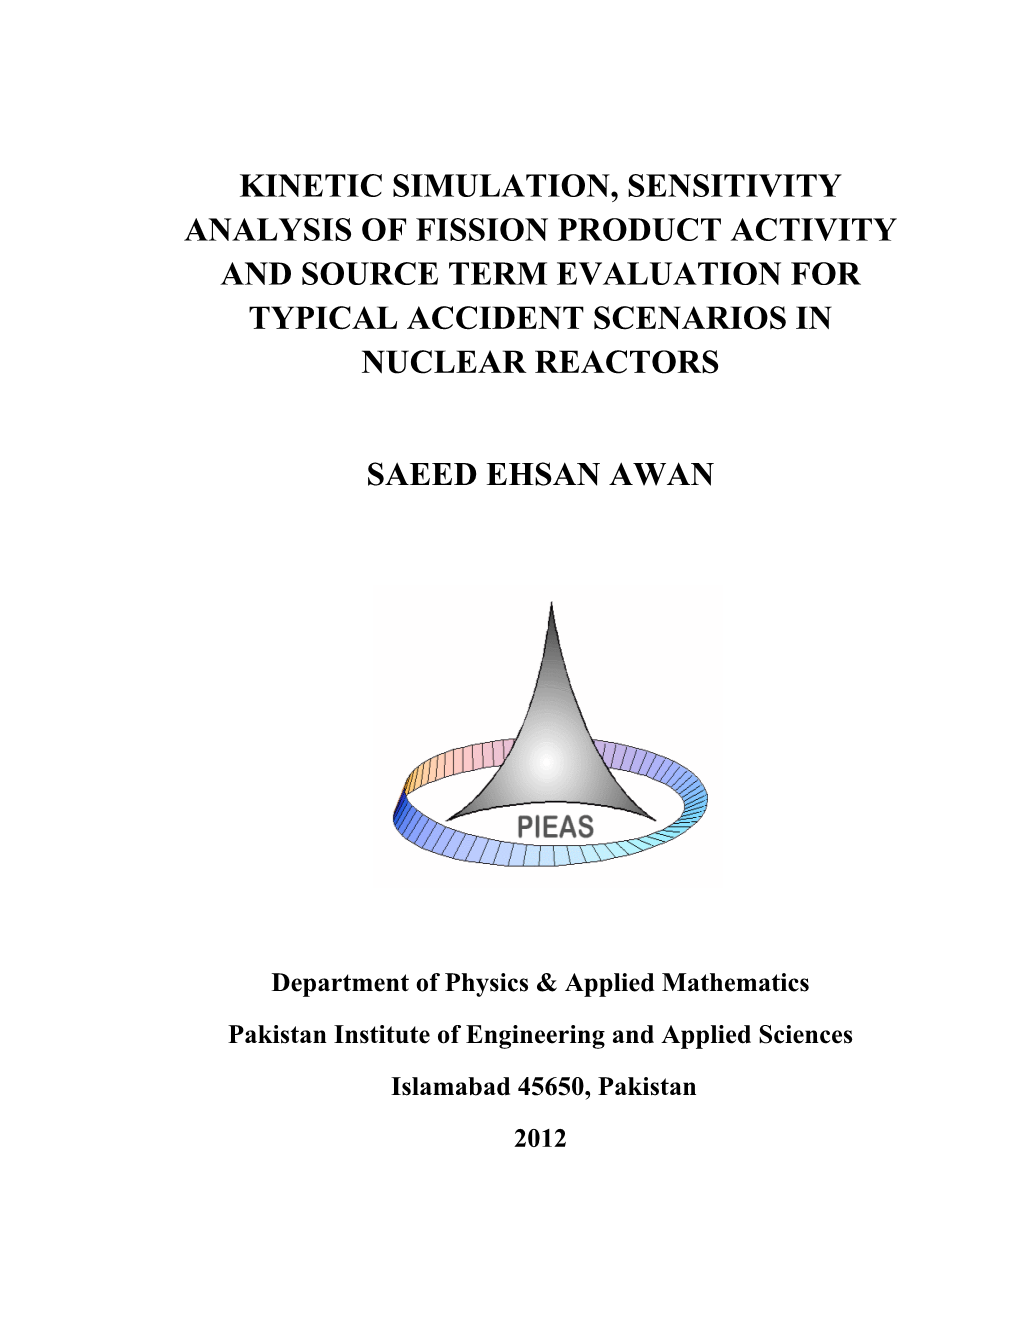 Kinetic Simulation, Sensitivity Analysis of Fission Product Activity and Source Term Evaluation for Typical Accident Scenarios in Nuclear Reactors